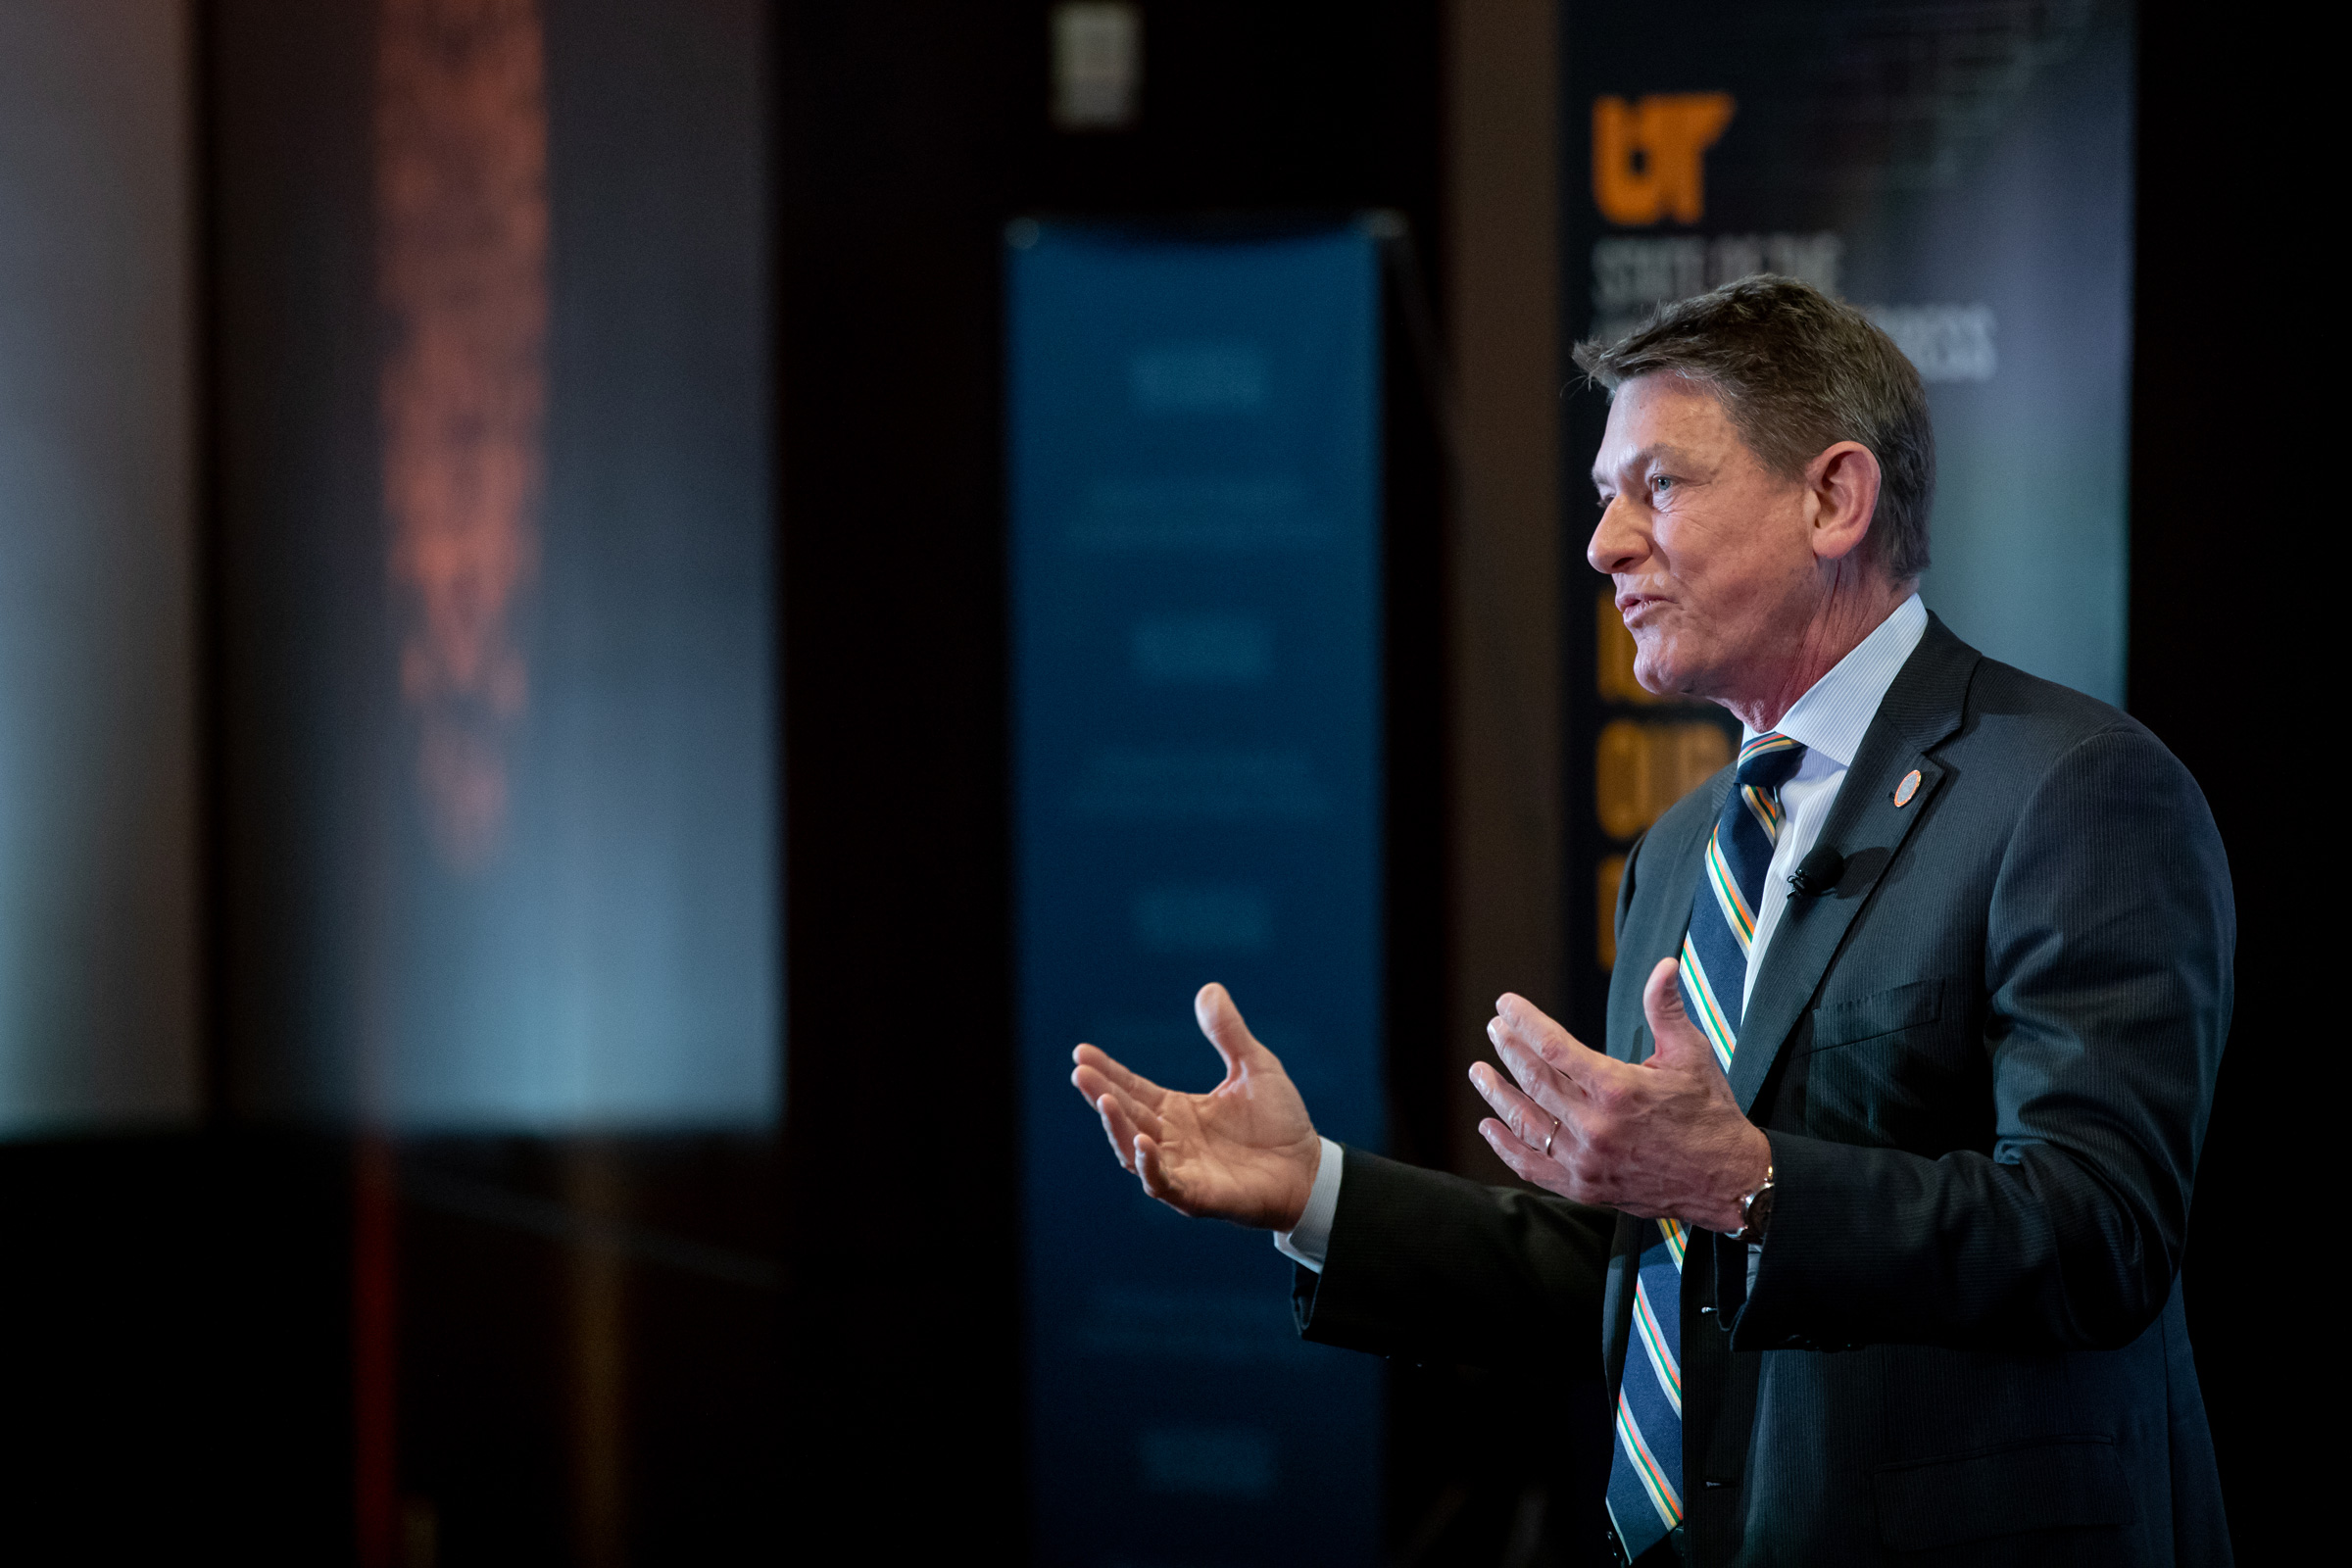 Randy Boyd delivers the State of UT address on stage